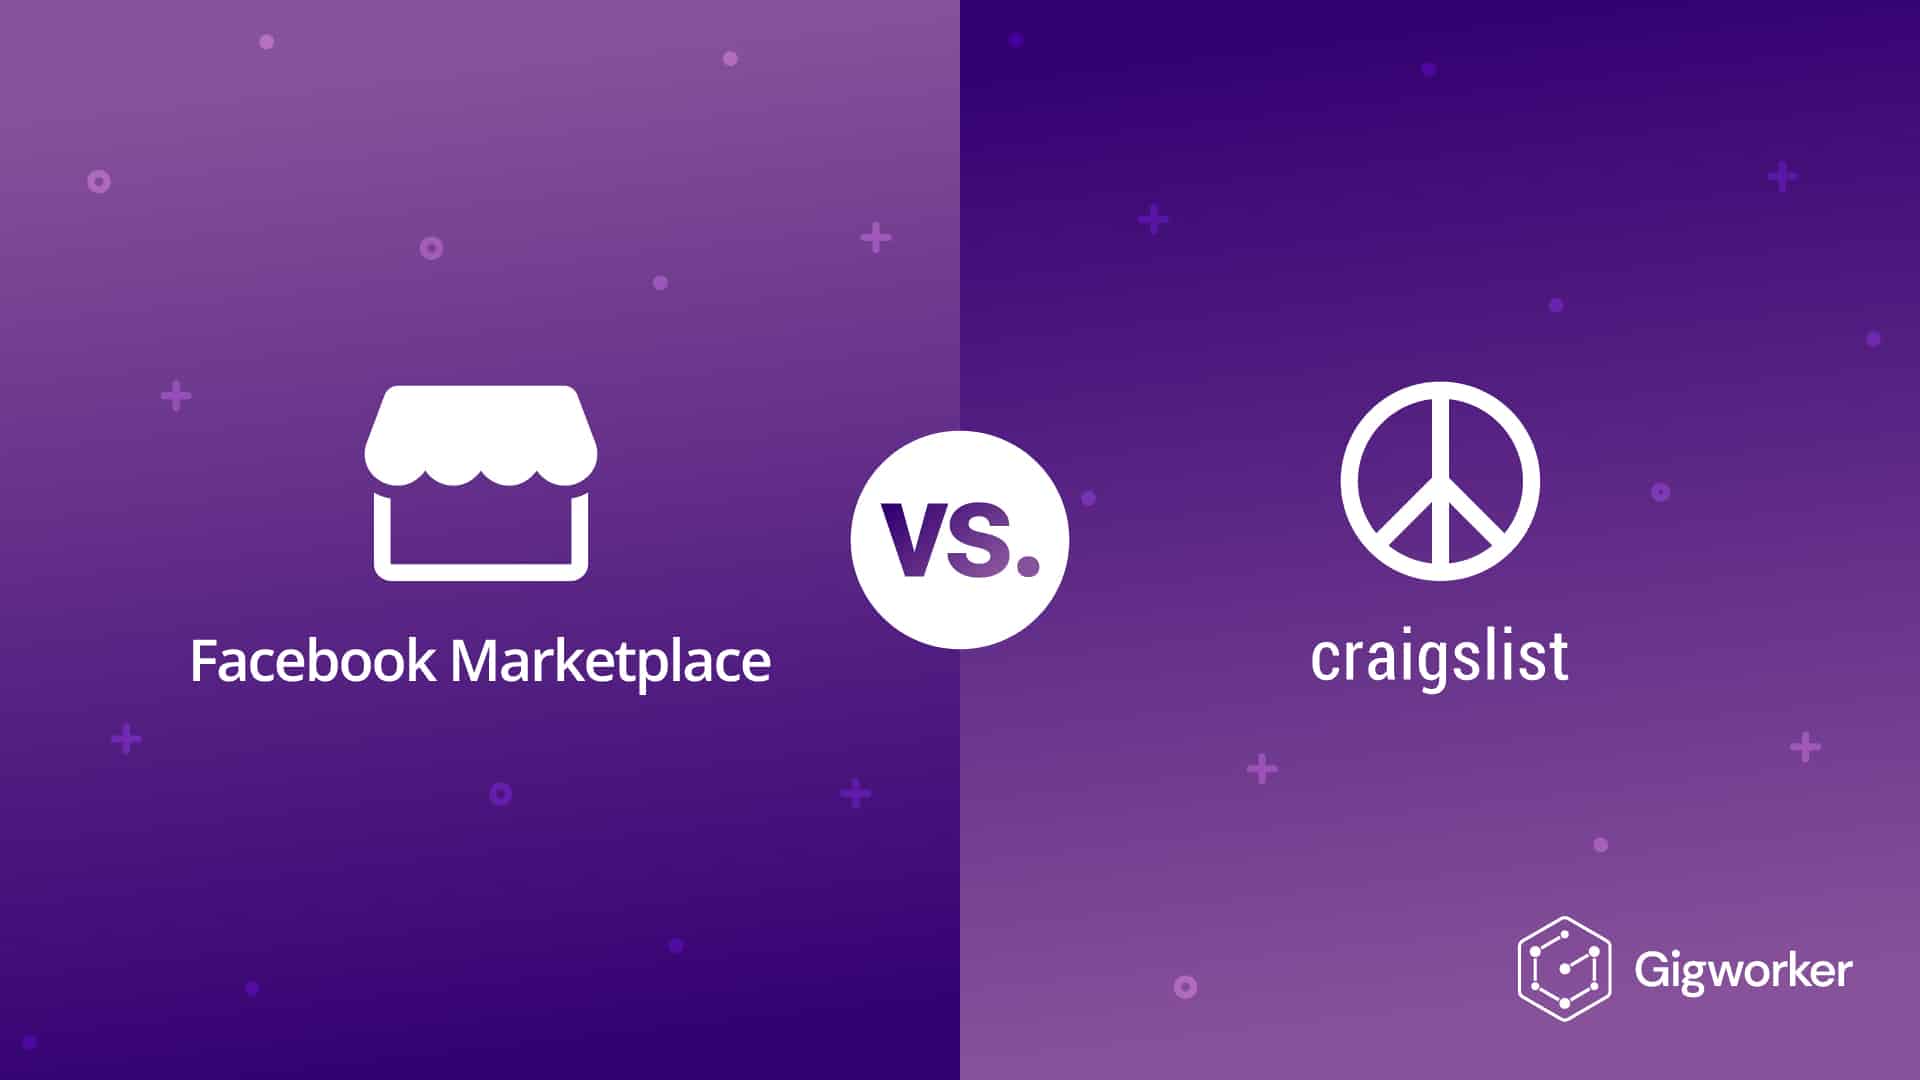 vector graphic showing an illustration of a comparison of facebook marketplace vs craigslist